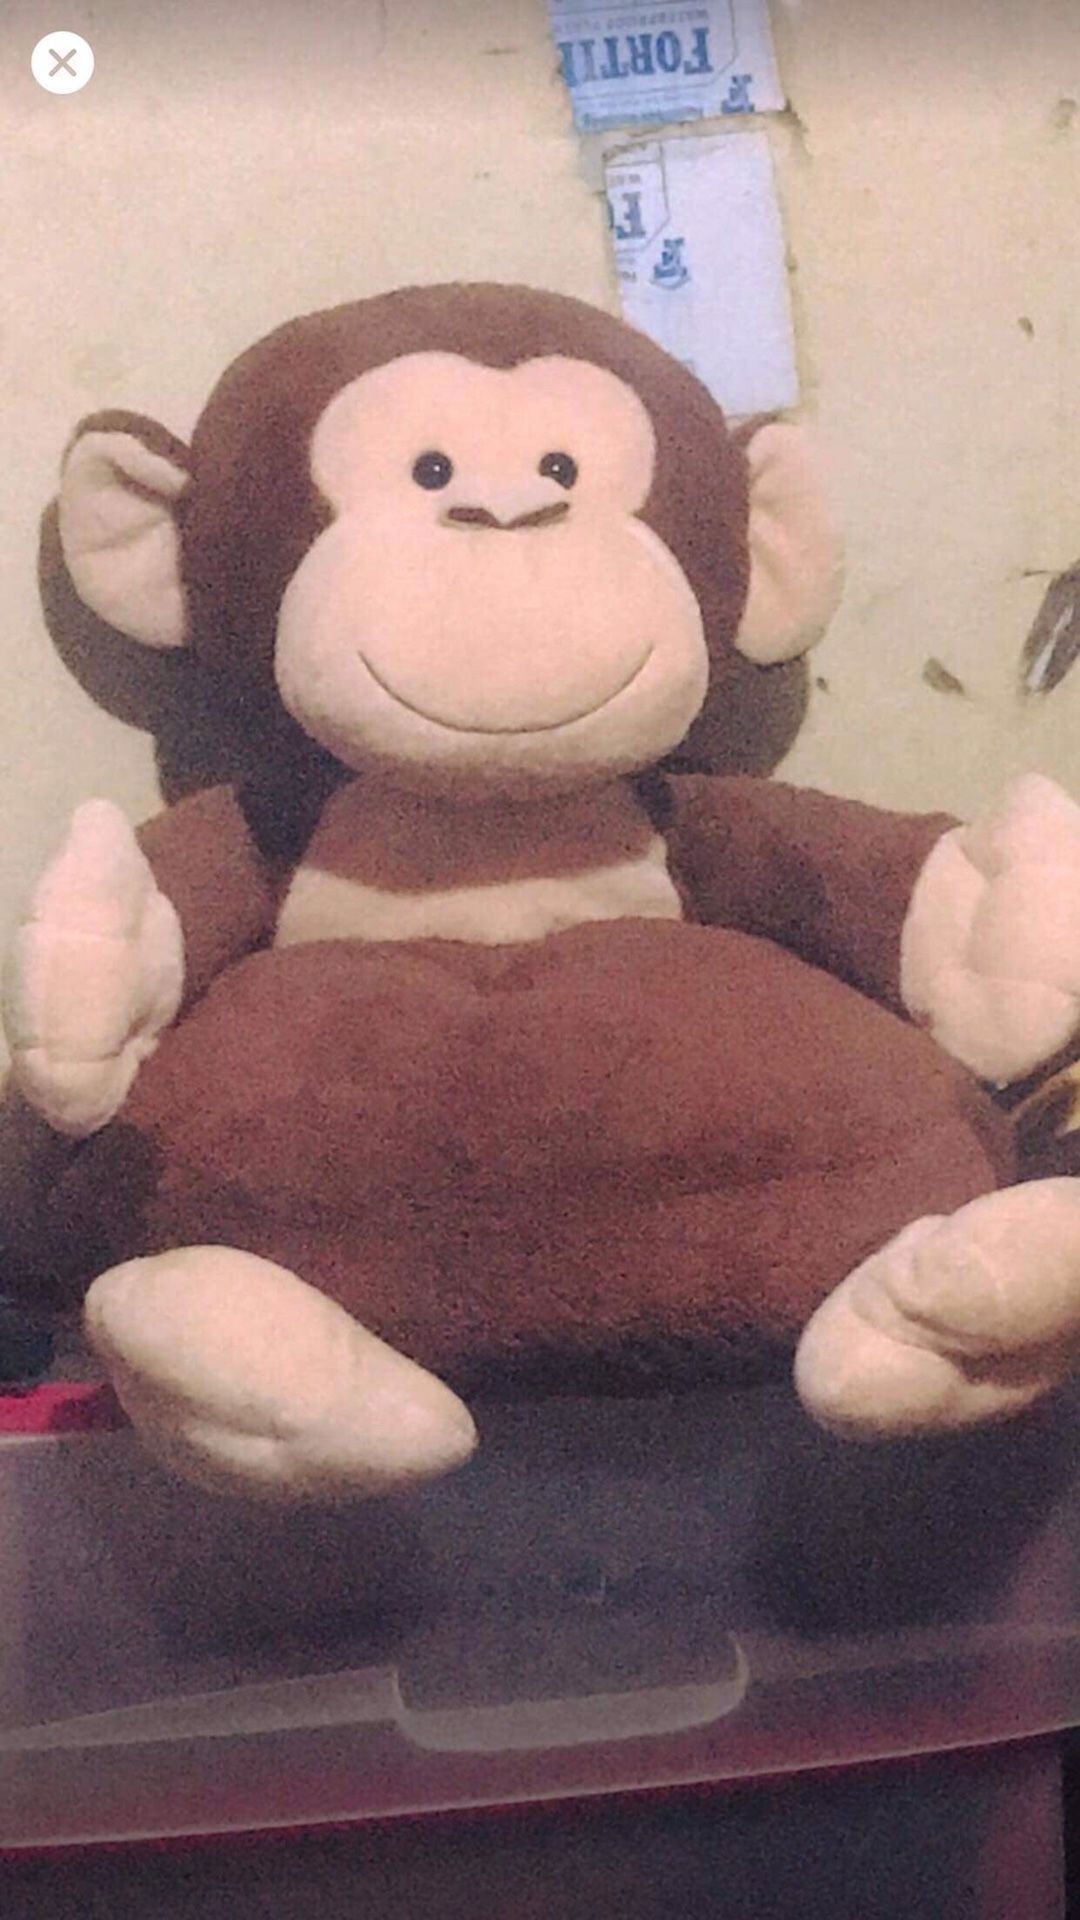 Monkey chair/pillow for kids